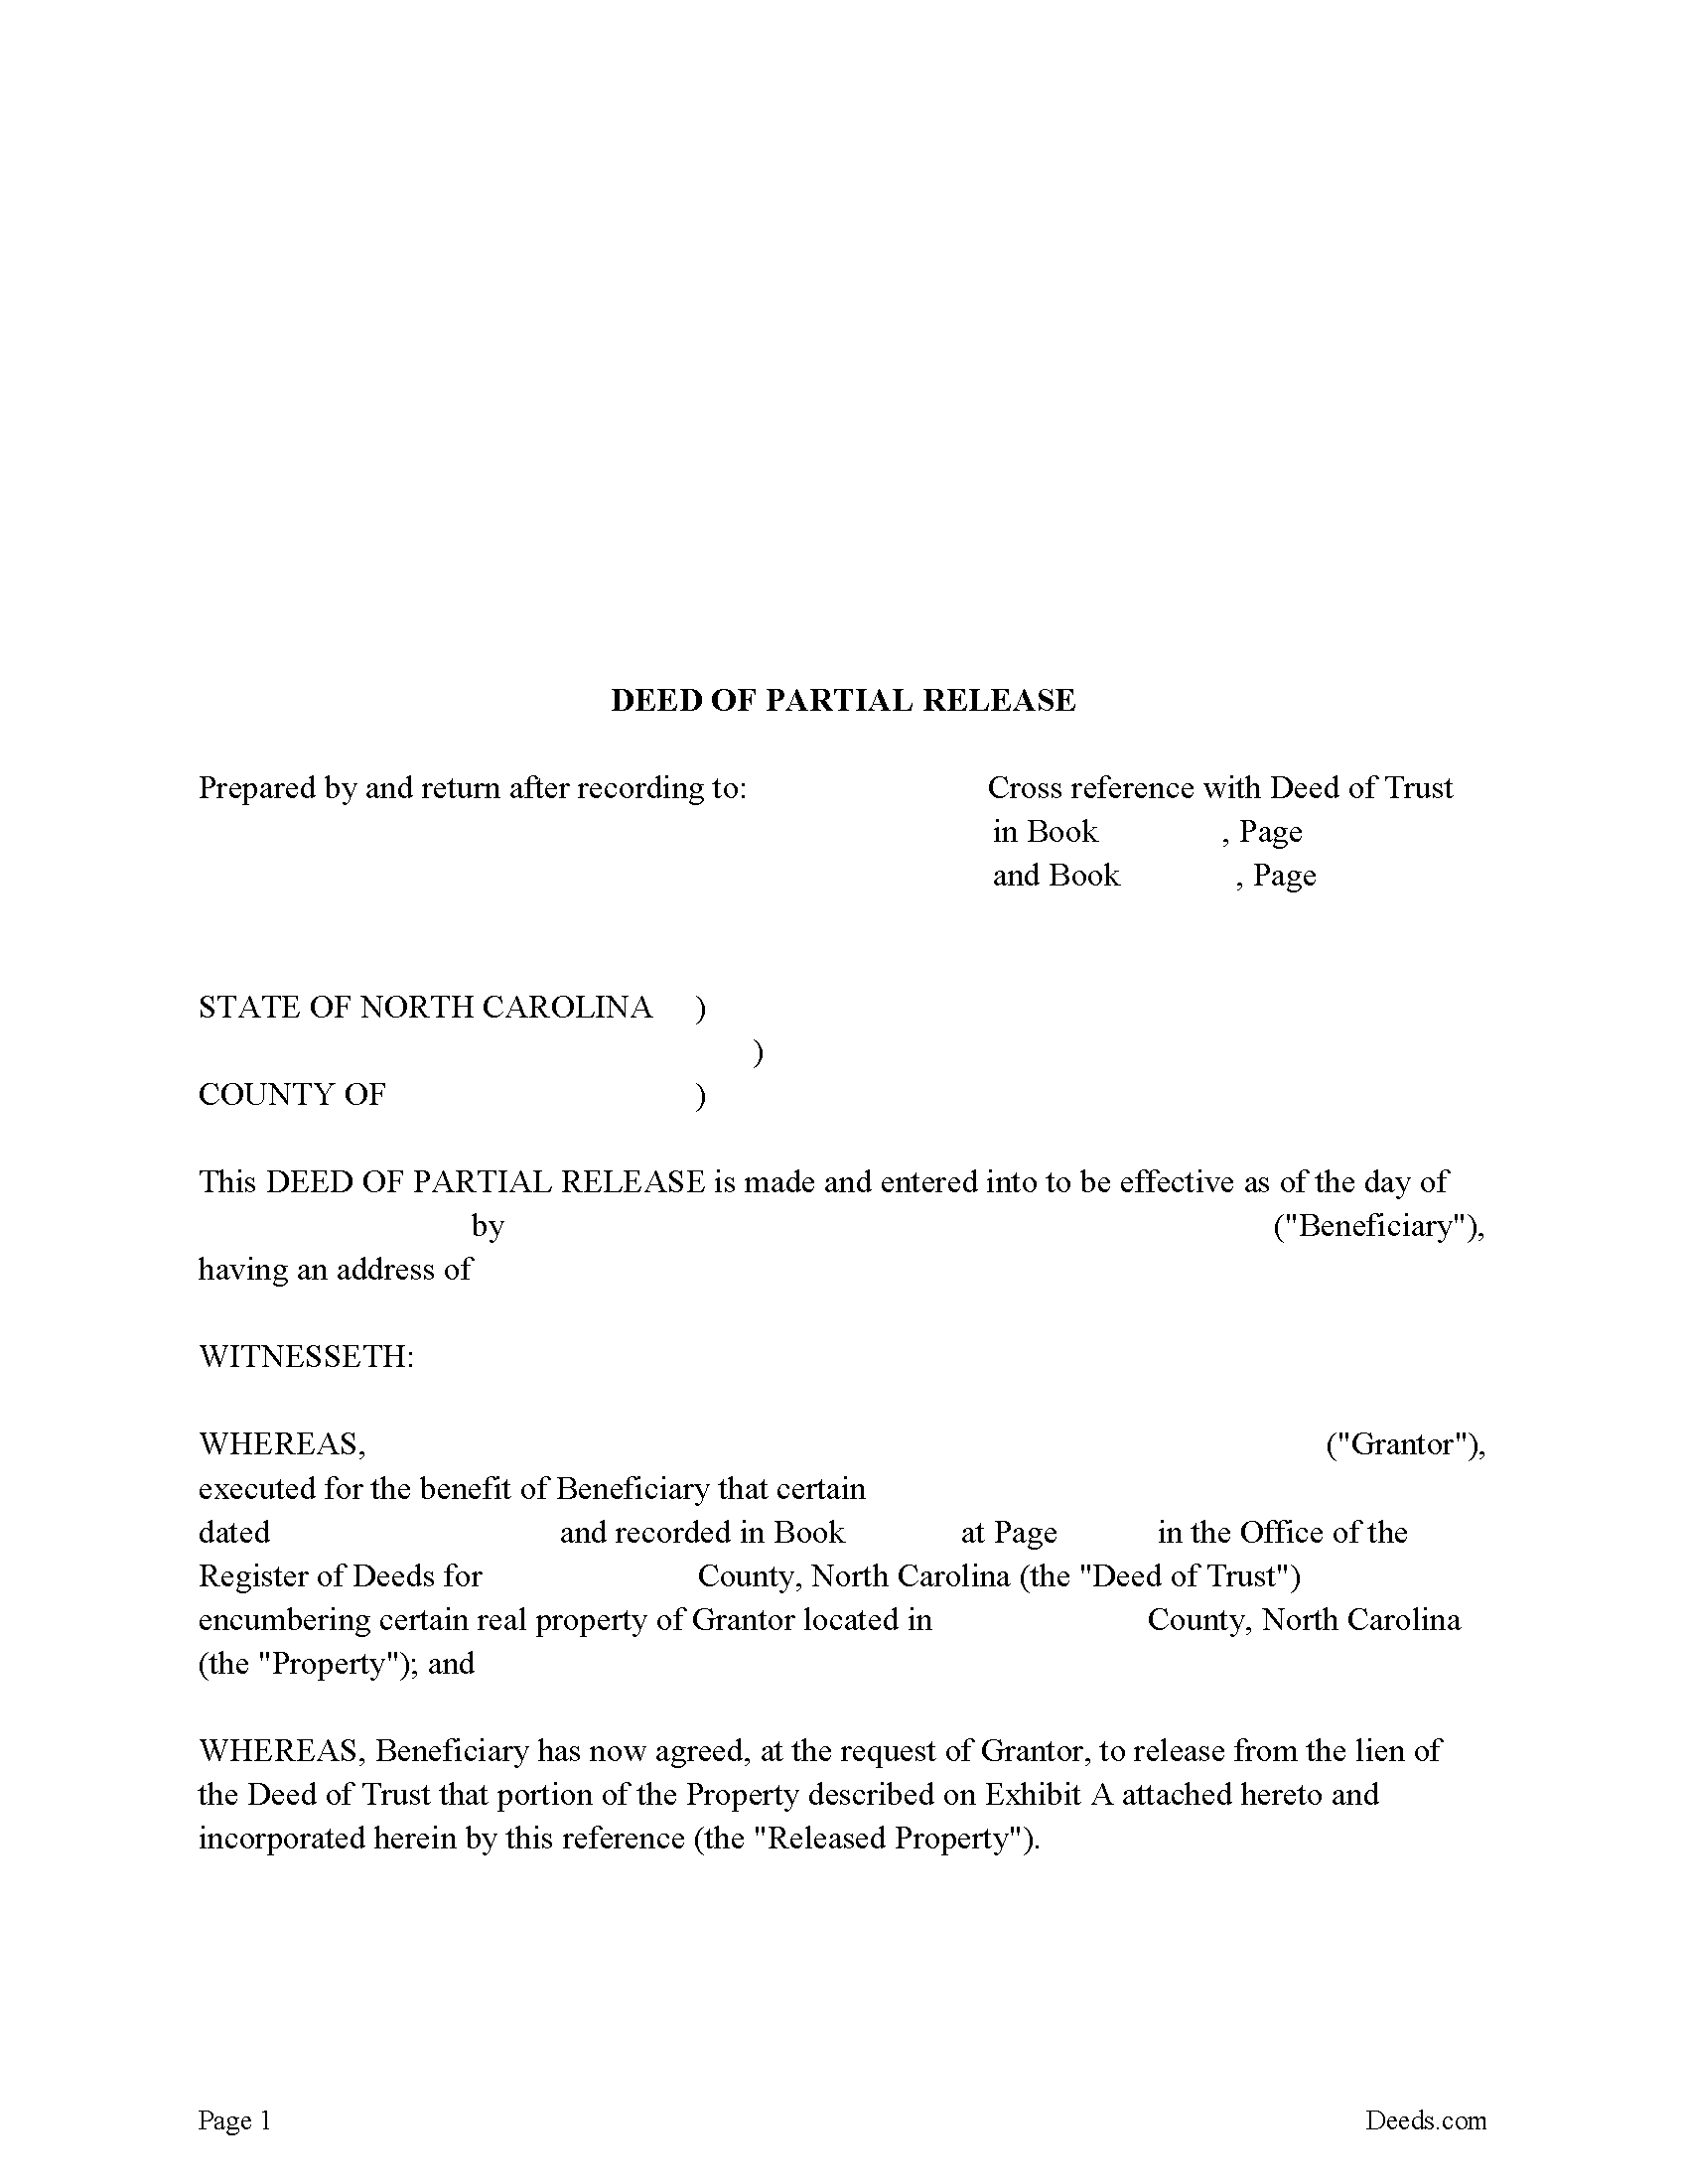 Deed of Partial Release Form